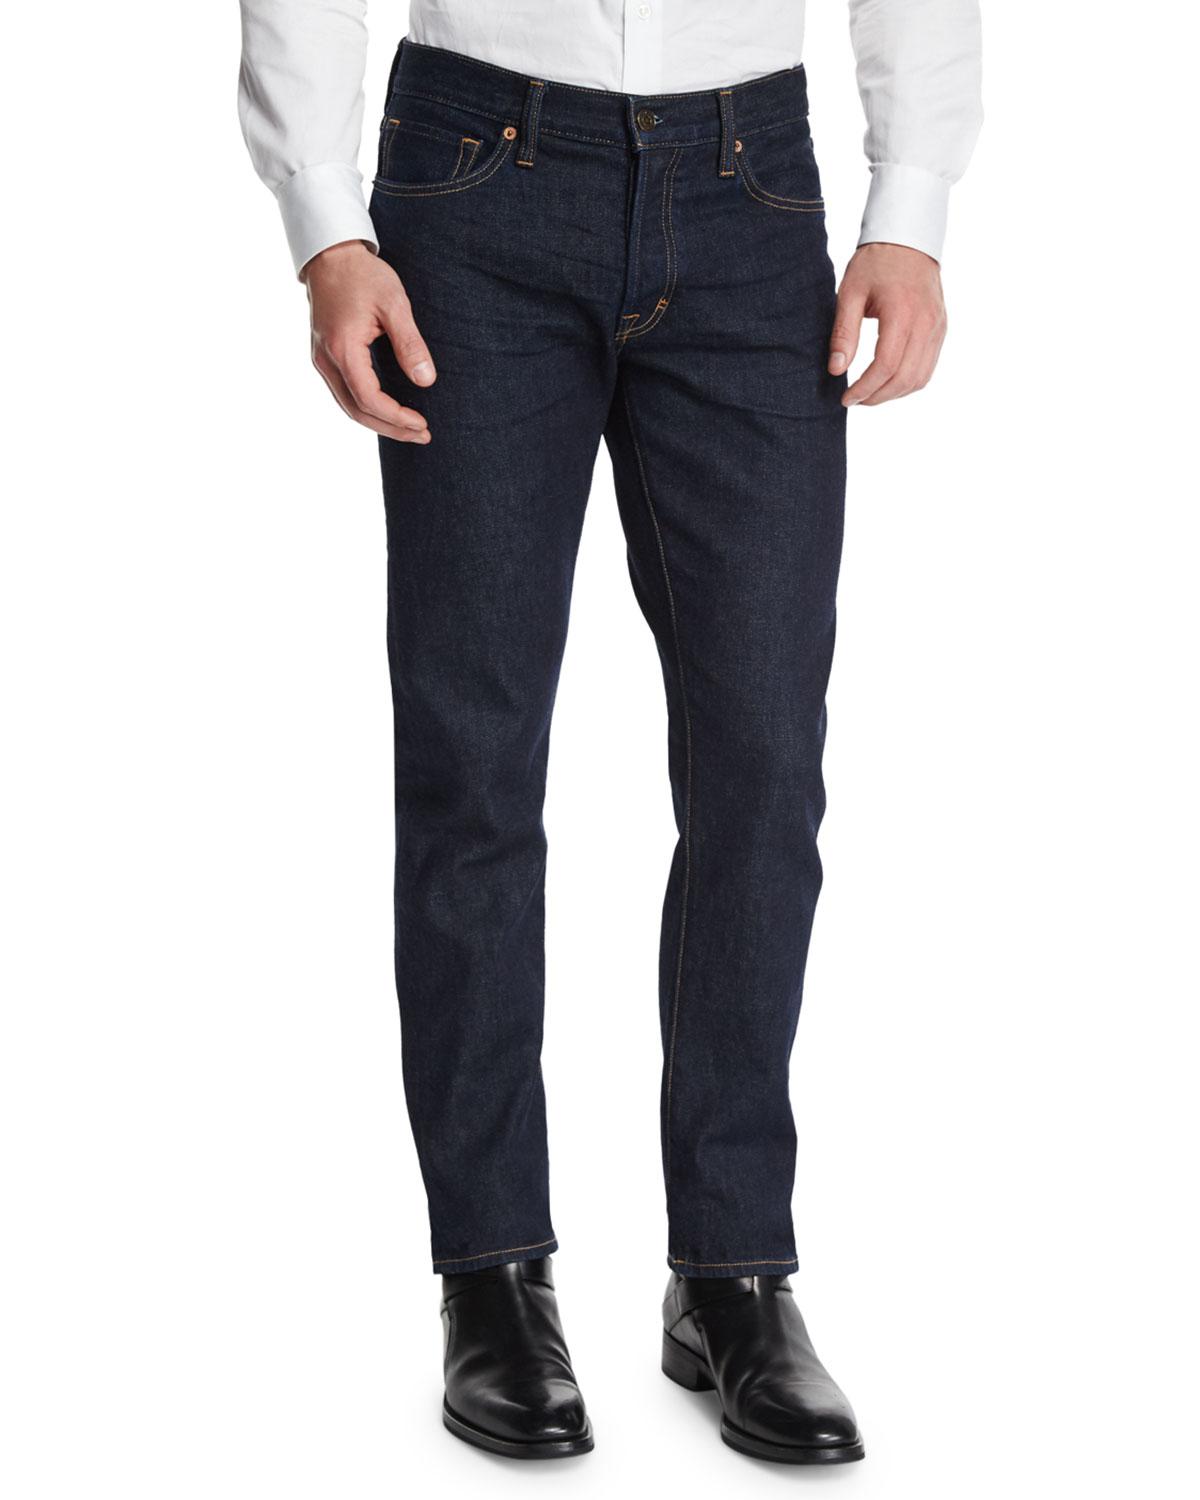 Tom Ford Straight-fit New Indigo Stretch Jeans in Blue for Men - Lyst